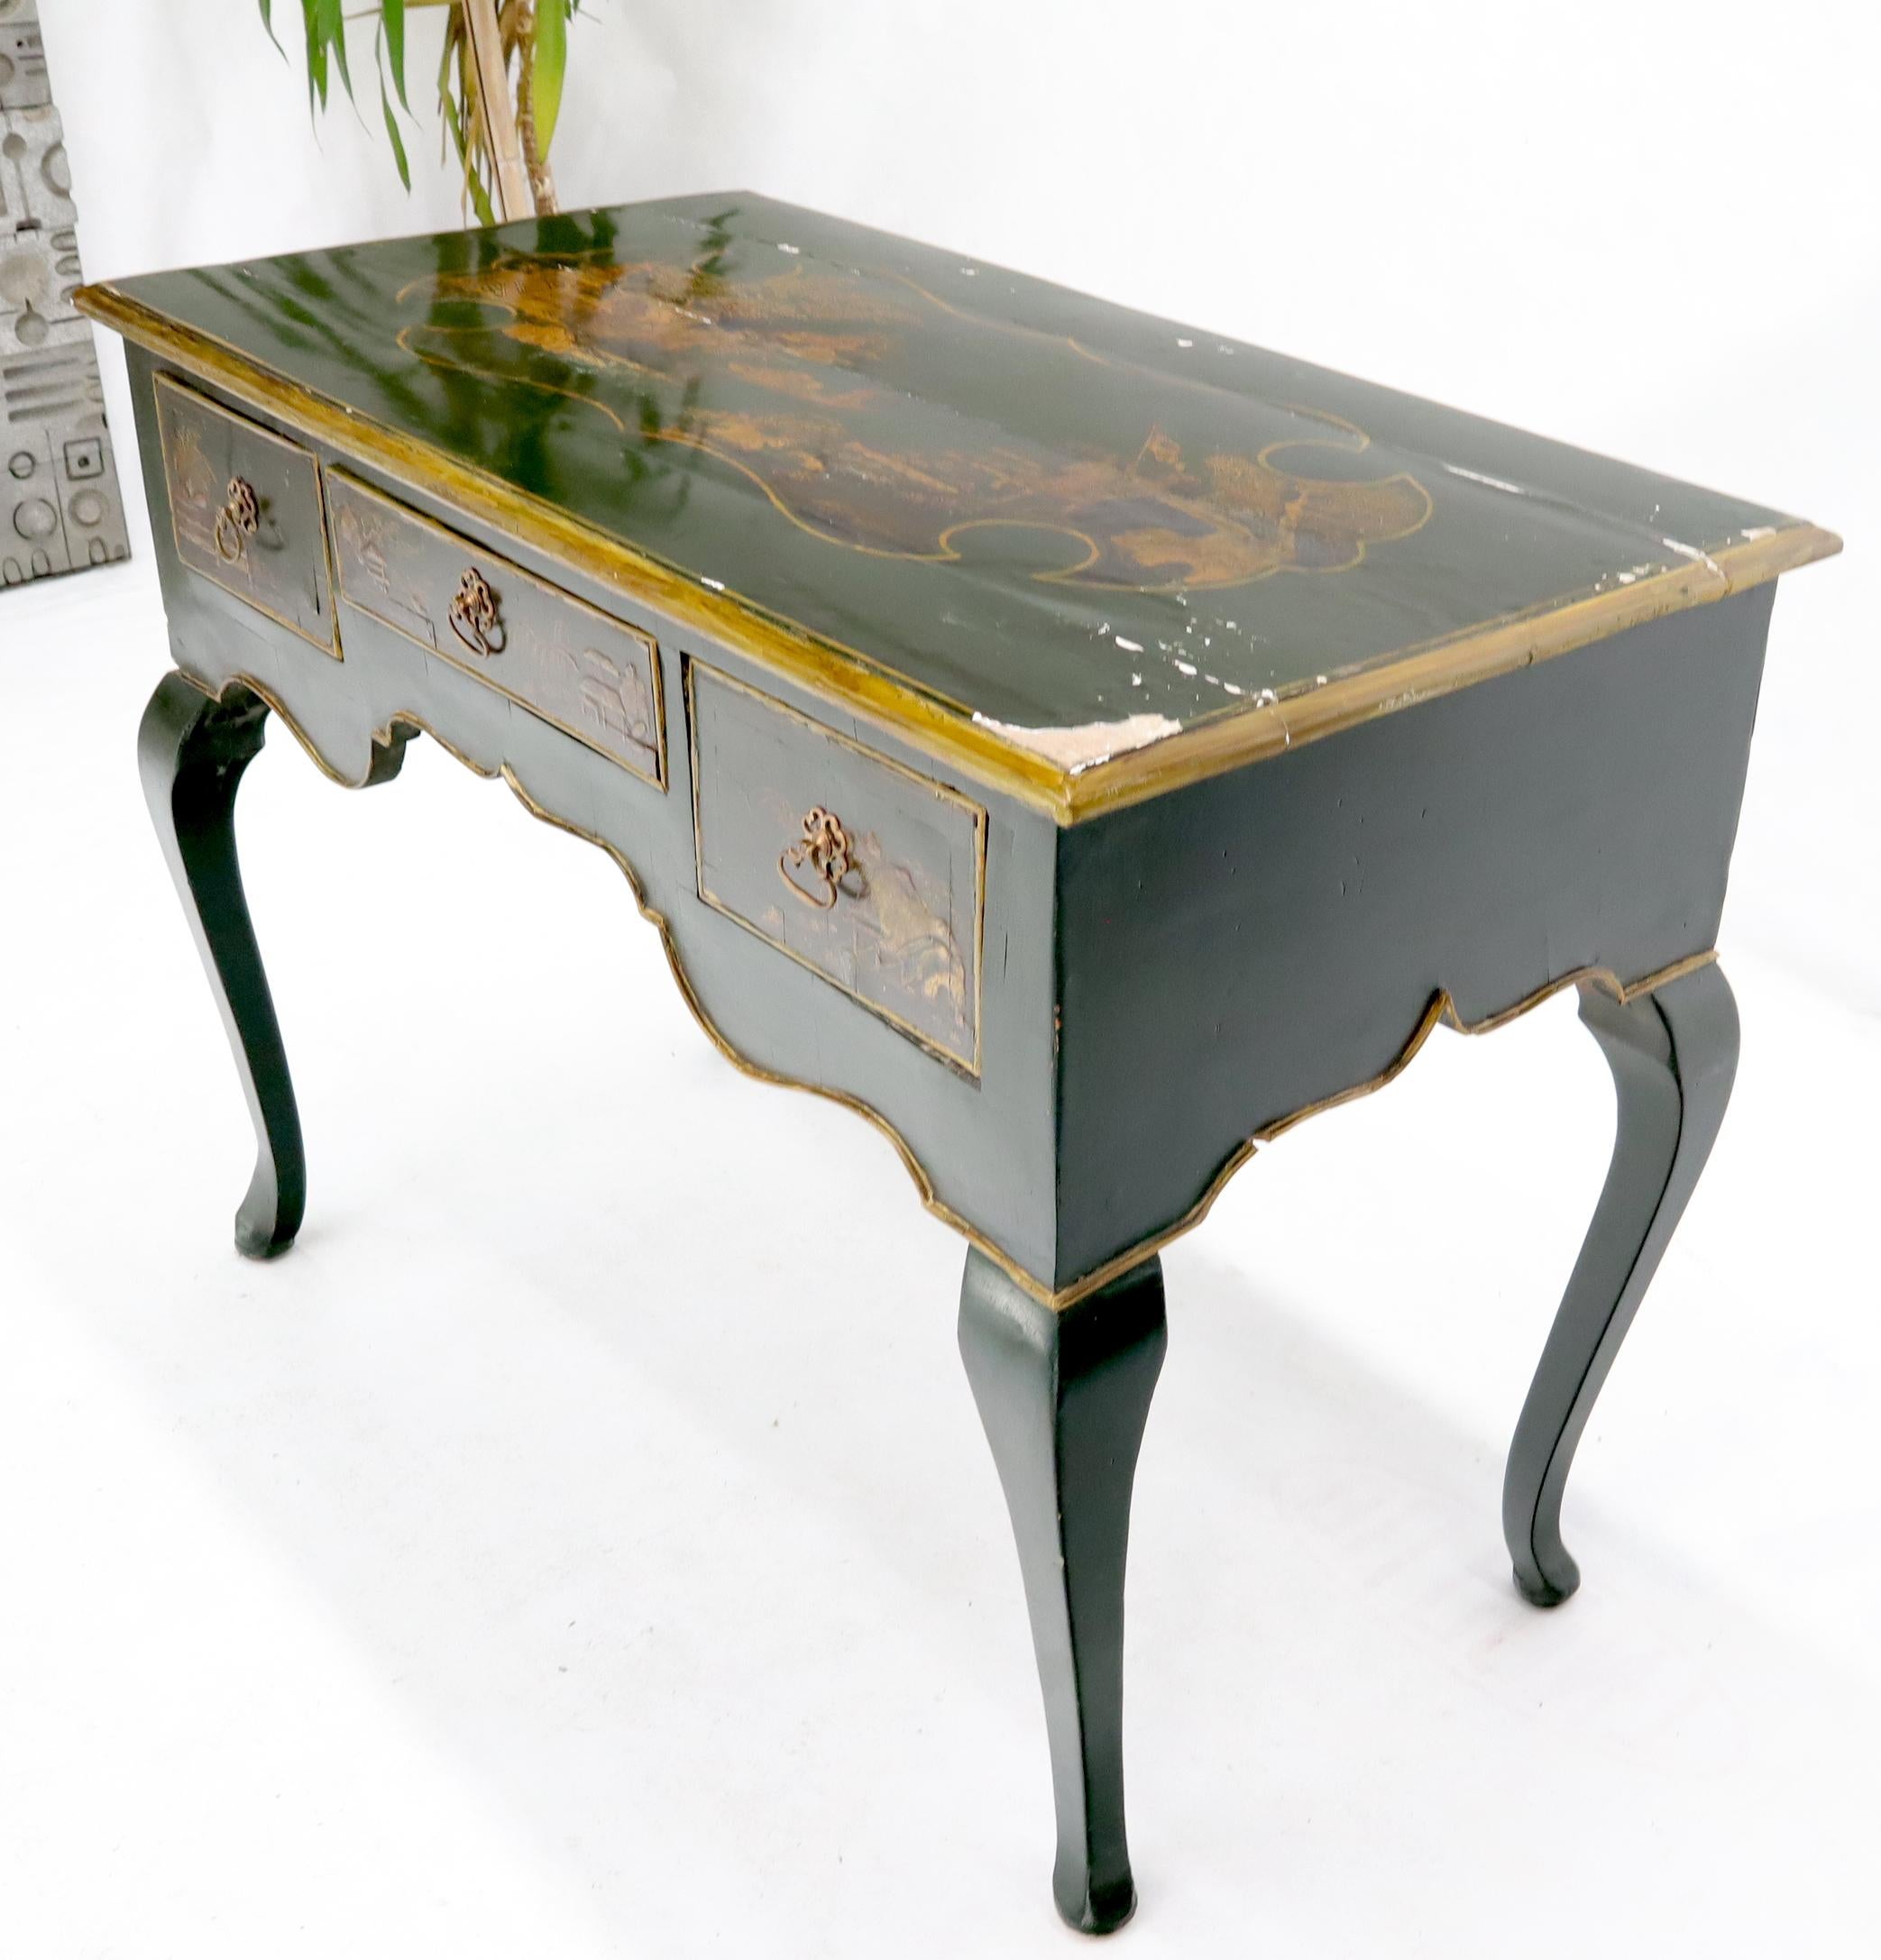 Unknown Antique 18th Century Hand Decorated Chinoiserie Desk